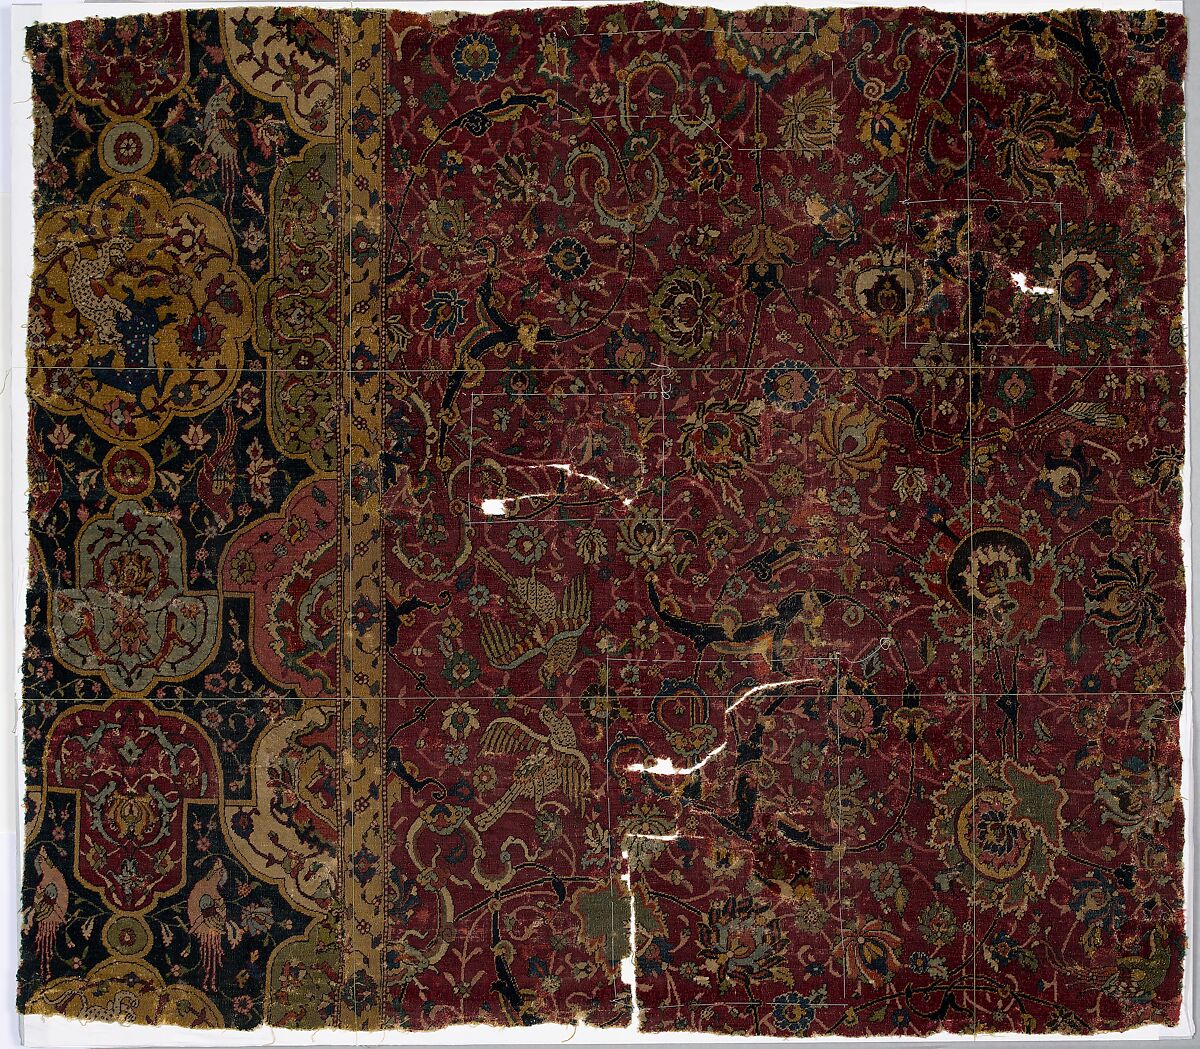 Fragment of a Carpet with Cartouche Border, Silk (warp and weft), wool (pile); asymmetrically knotted pile 